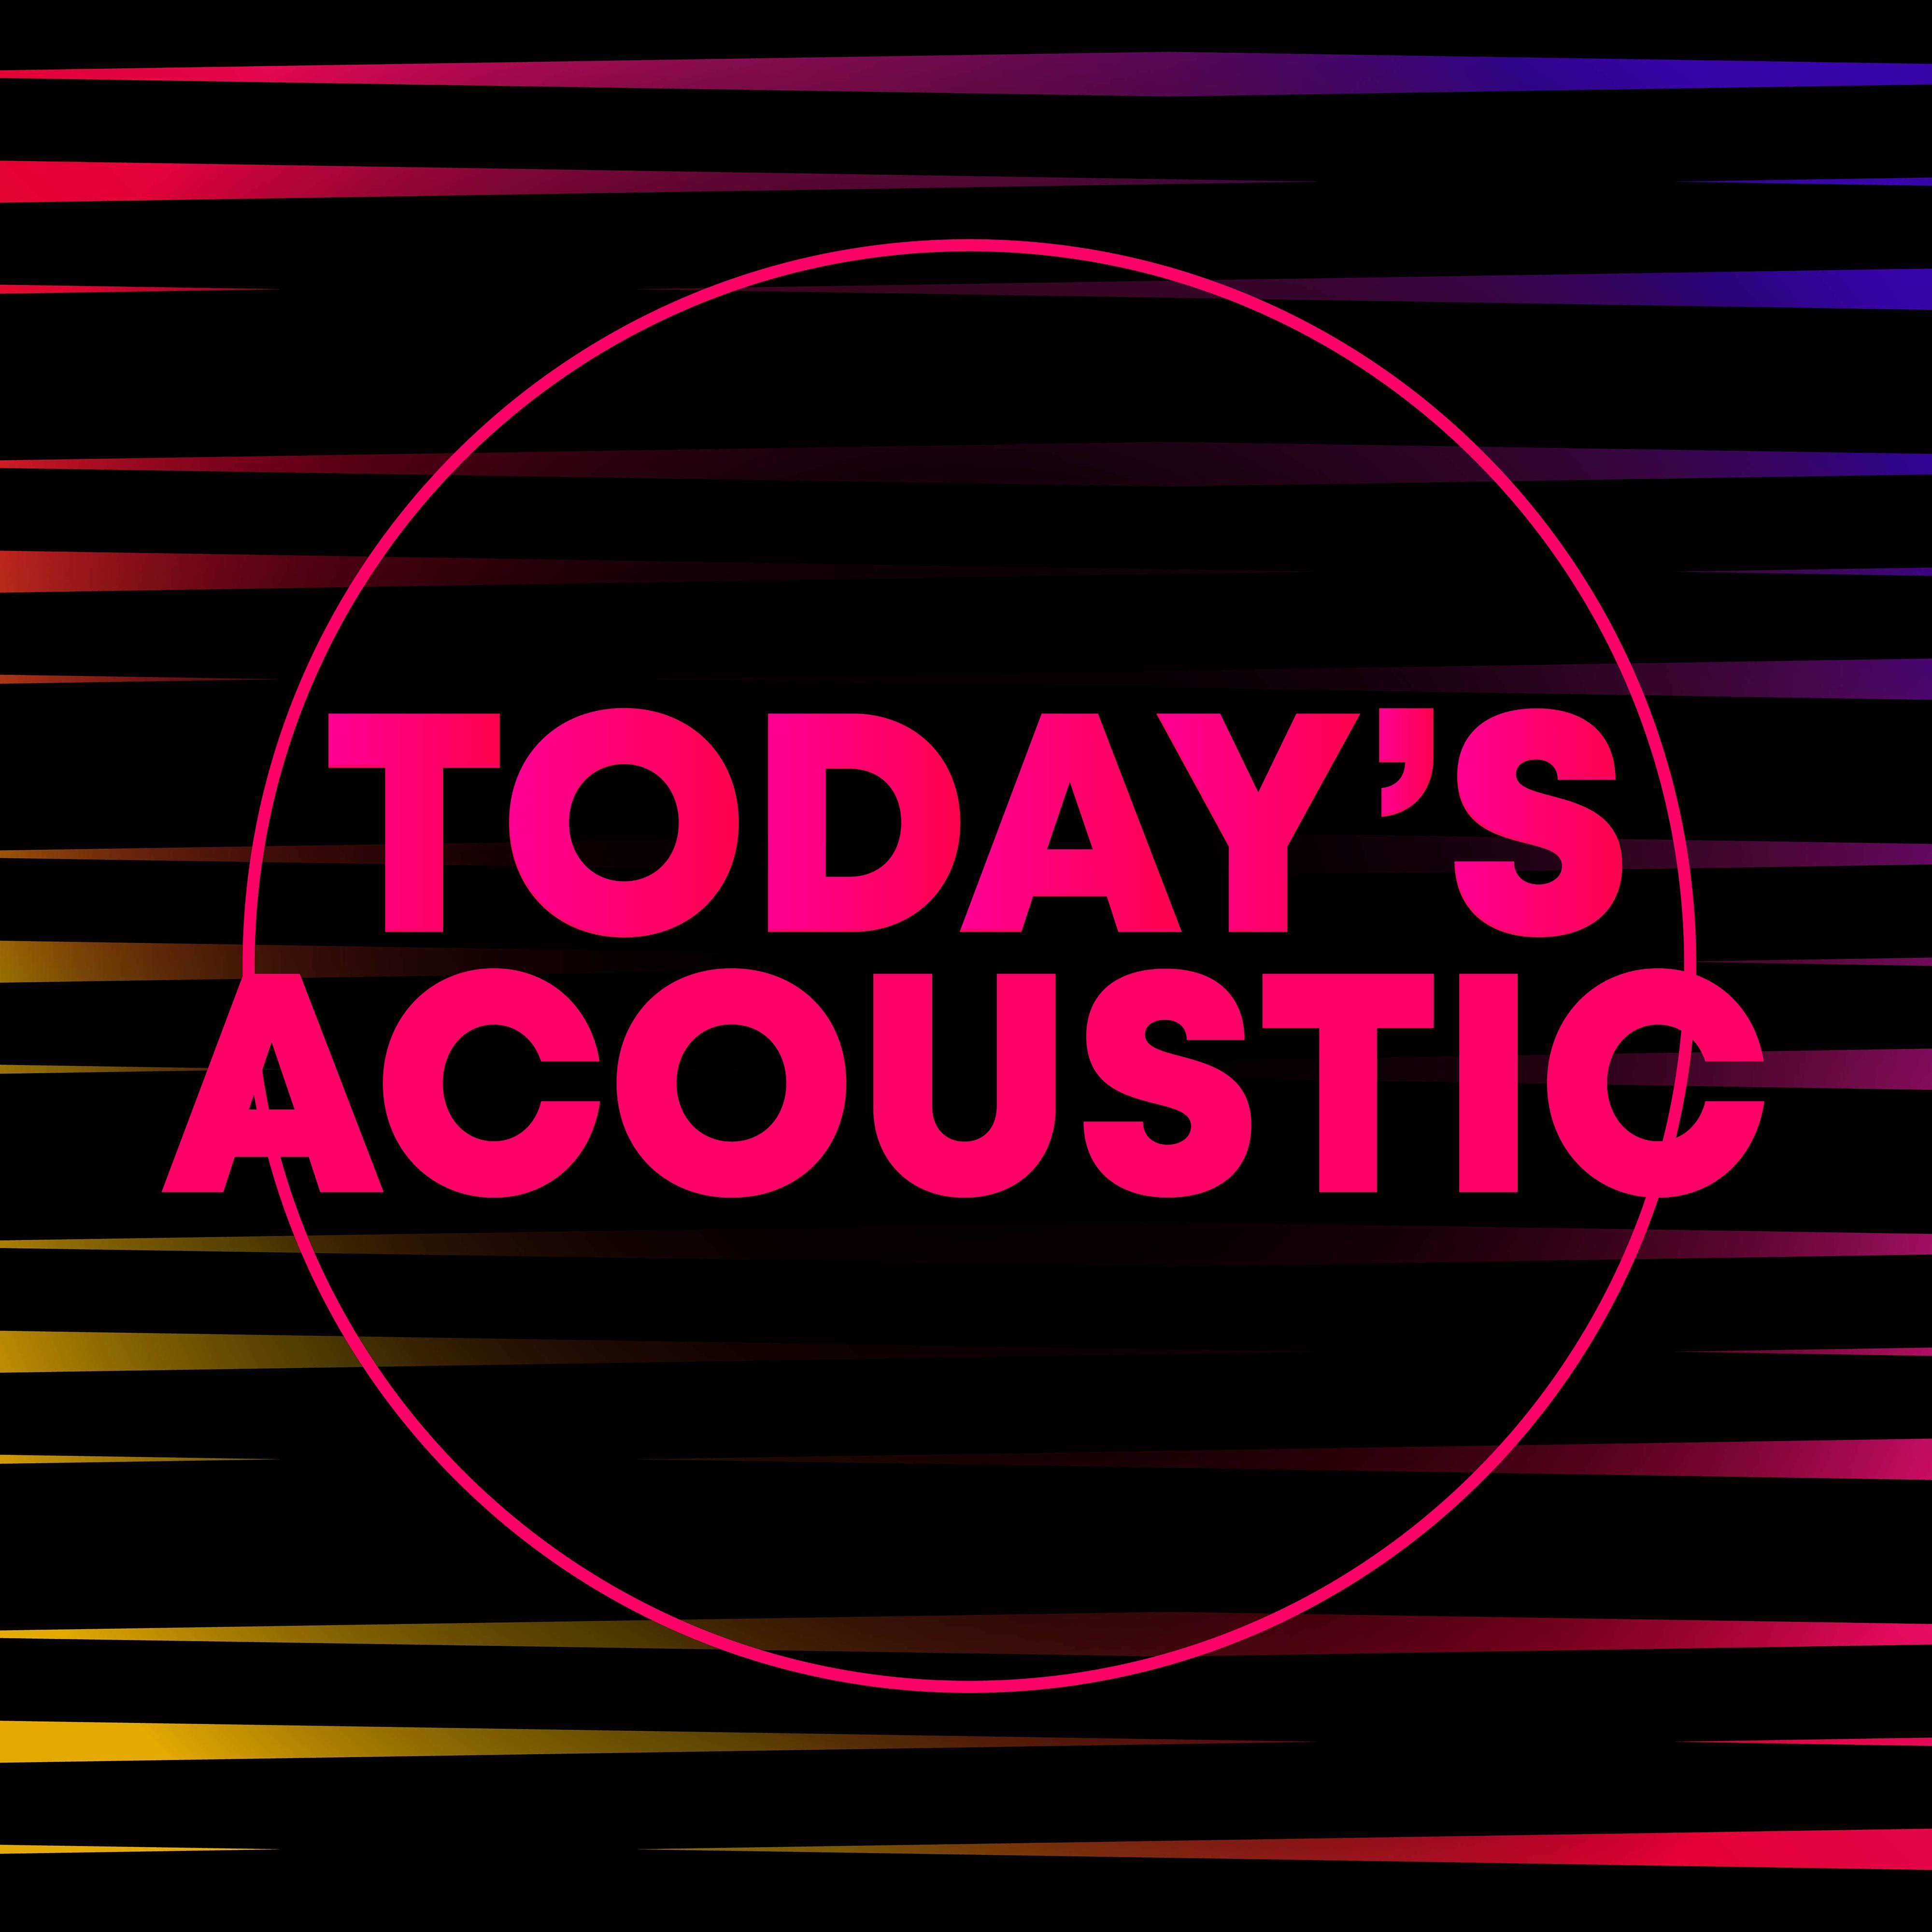 Today's Acoustic